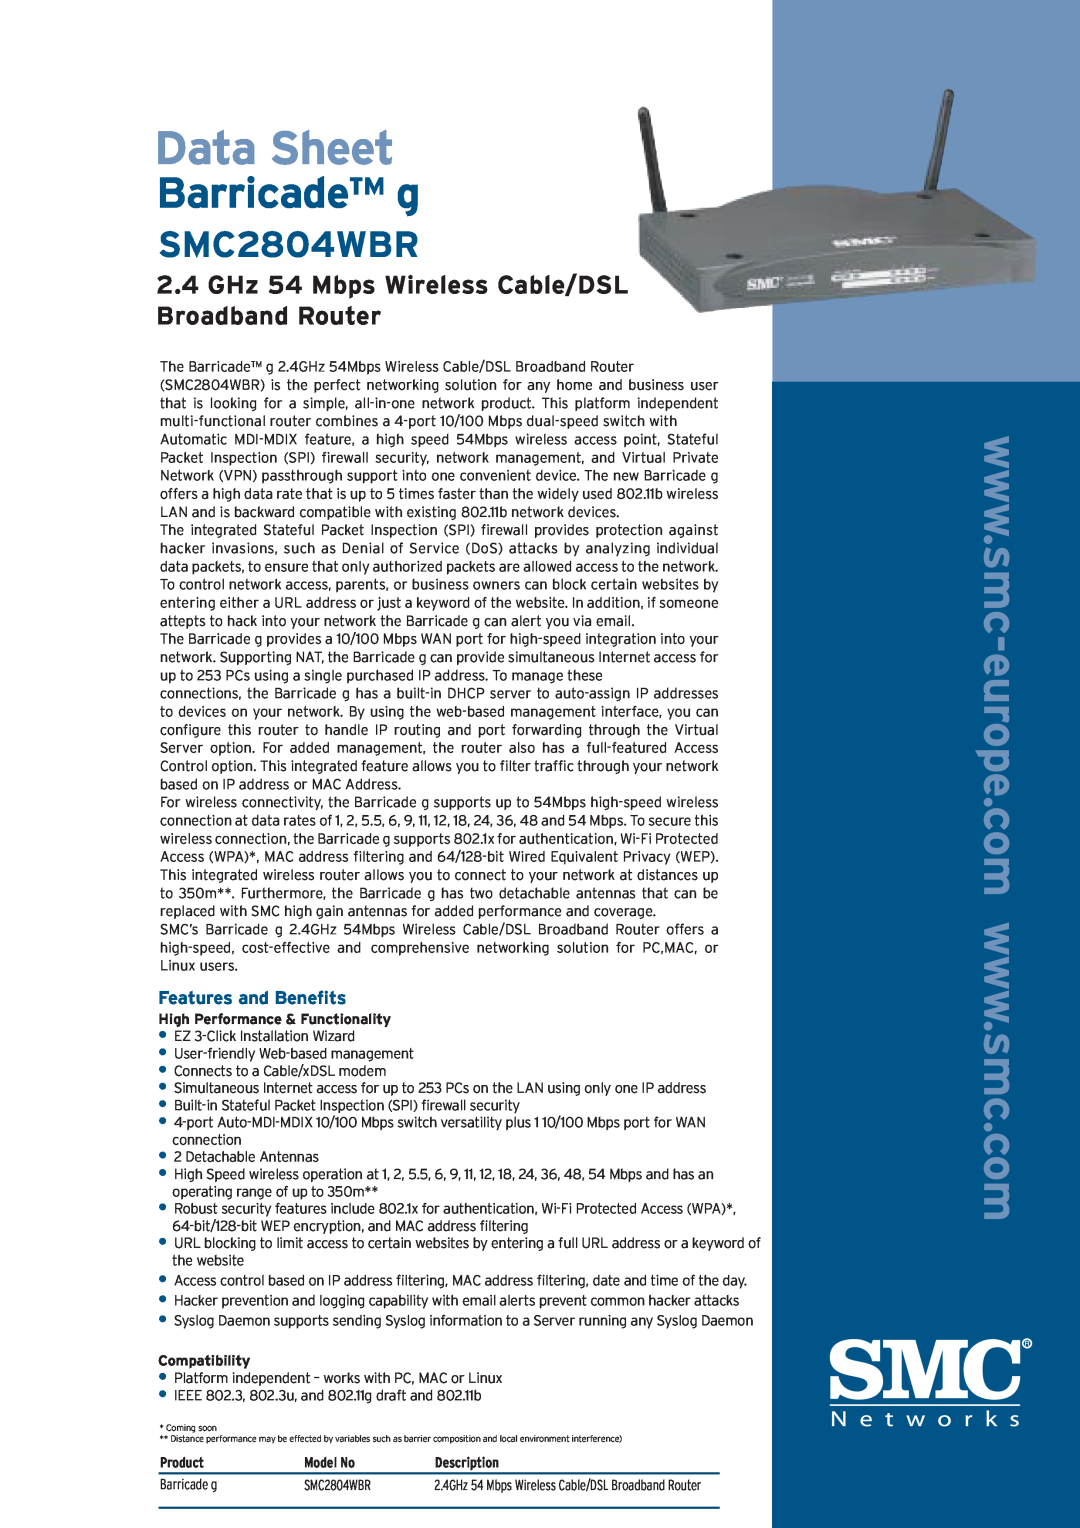 SMC Networks SMC2804WBR manual Features and Beneﬁts, Data Sheet, Barricade g 